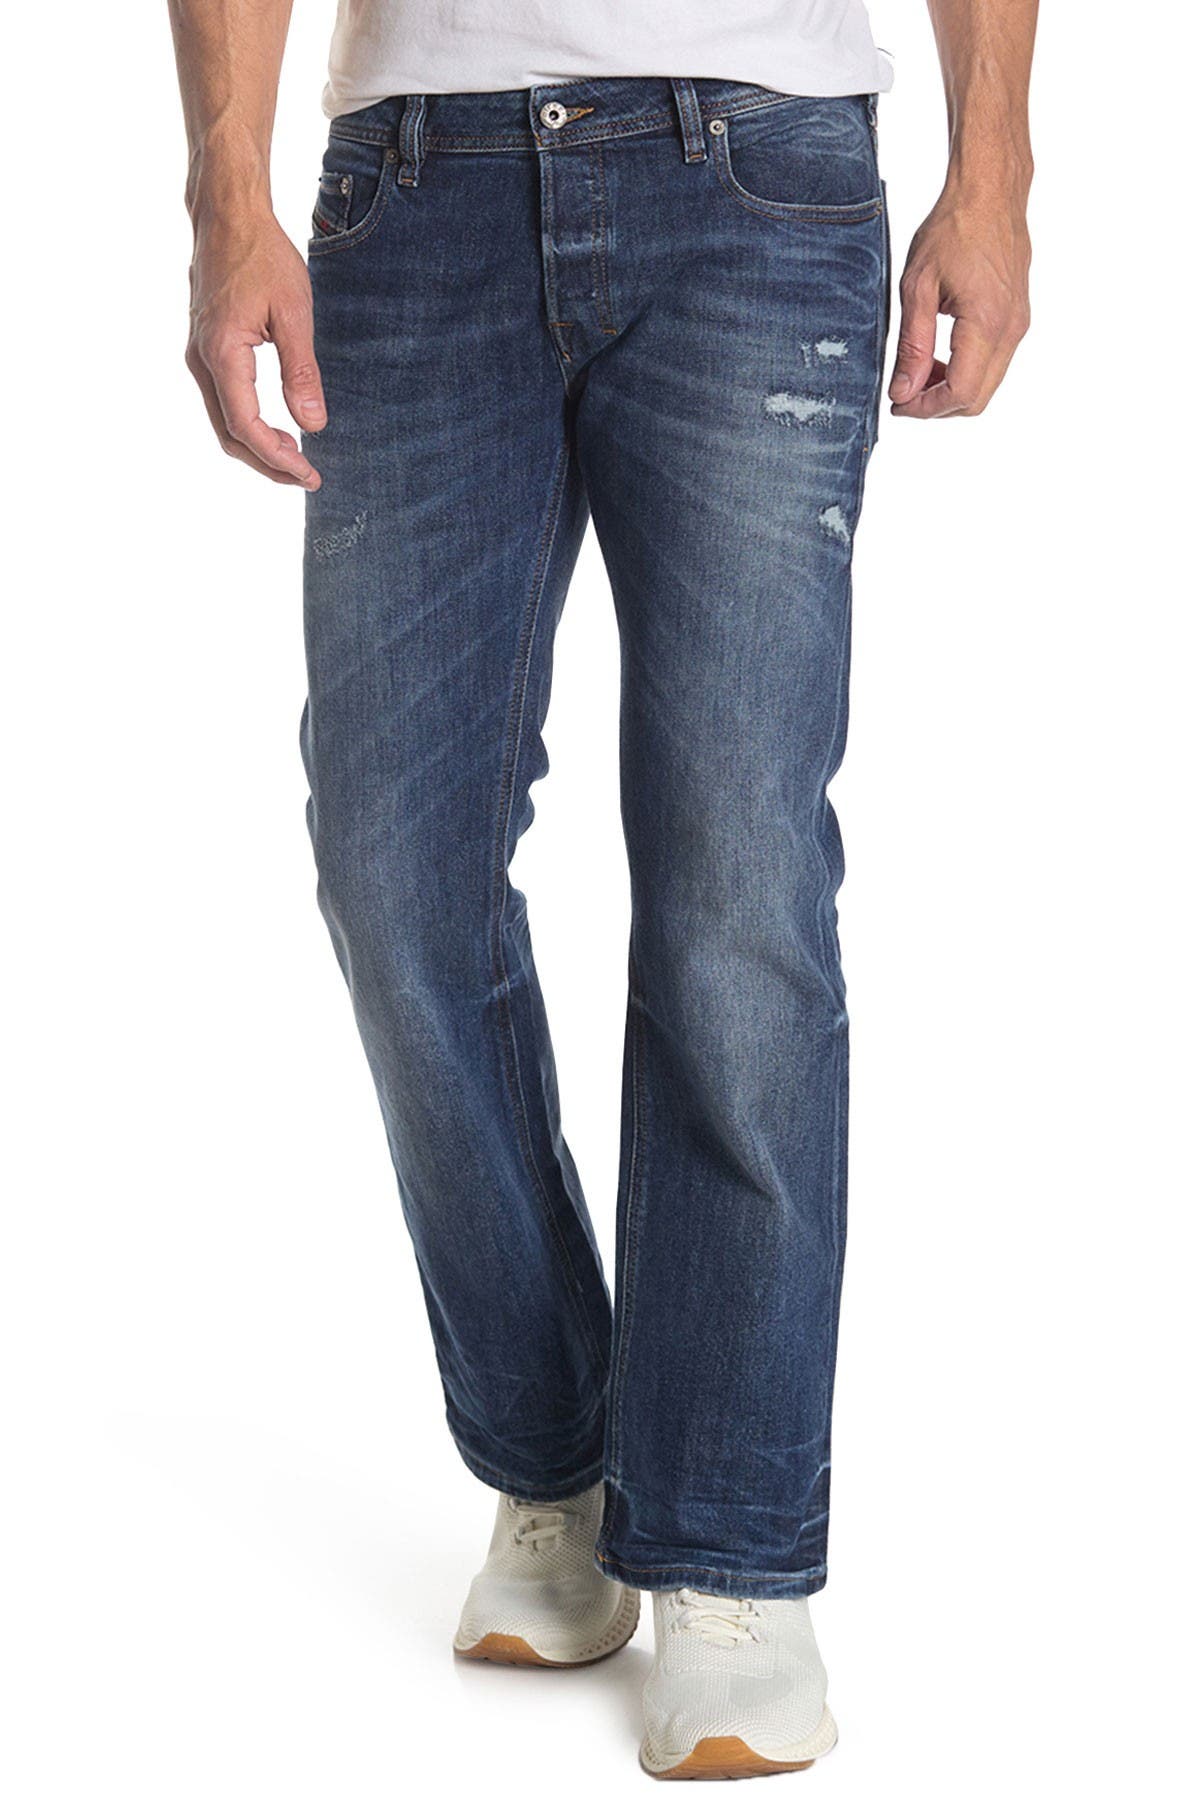 nordstrom mens bootcut jeans